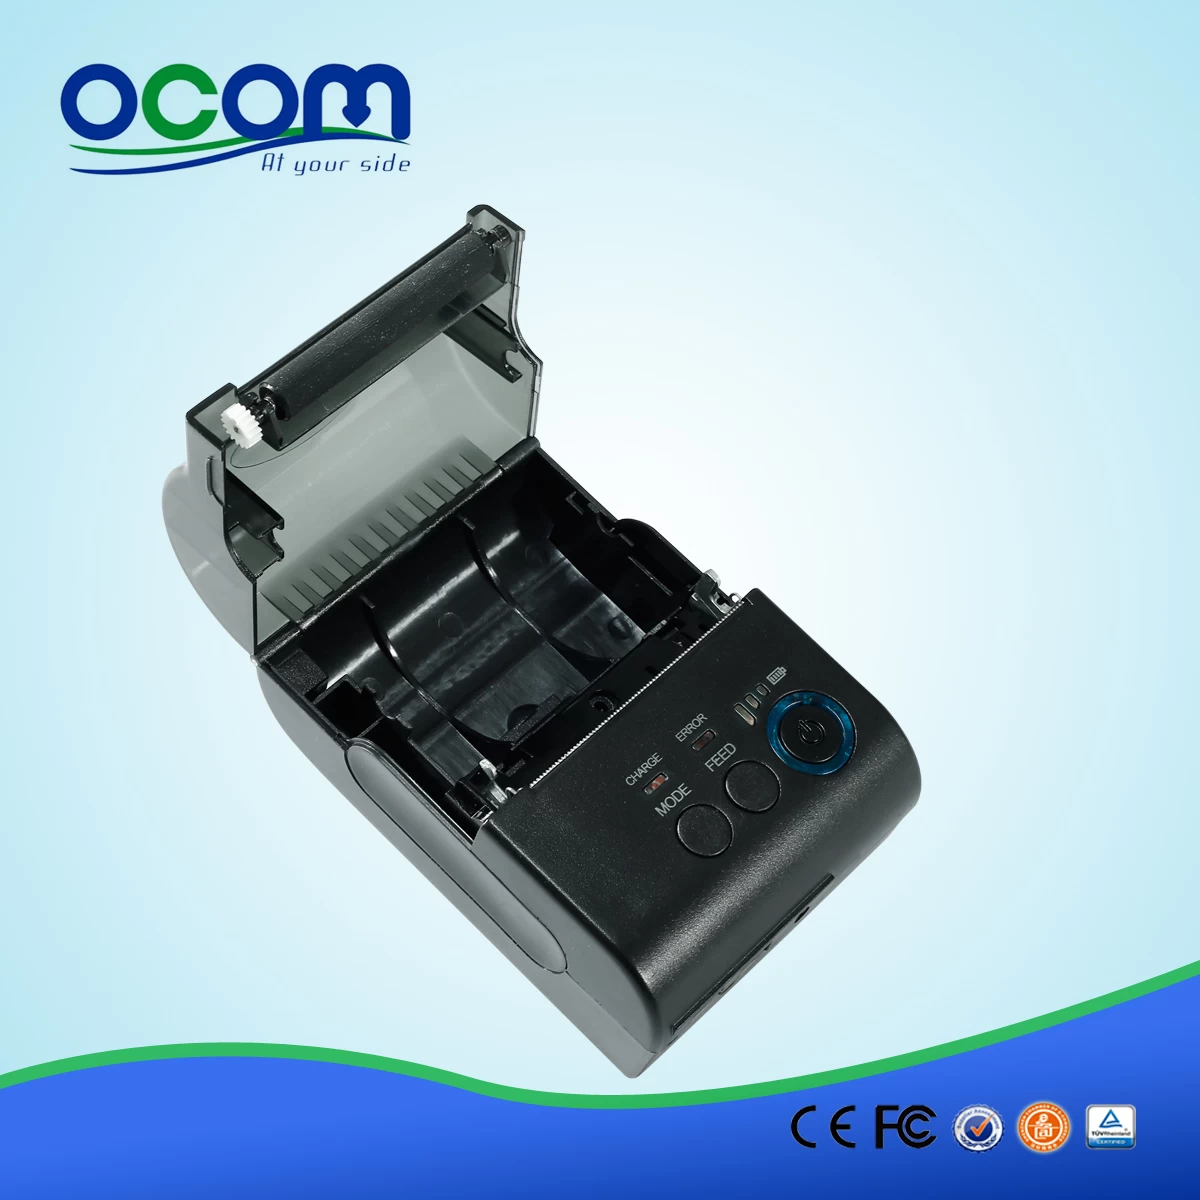 High Quality 58mm Android or IOS Bluetooth Thermal Printer ---OCPP-M03